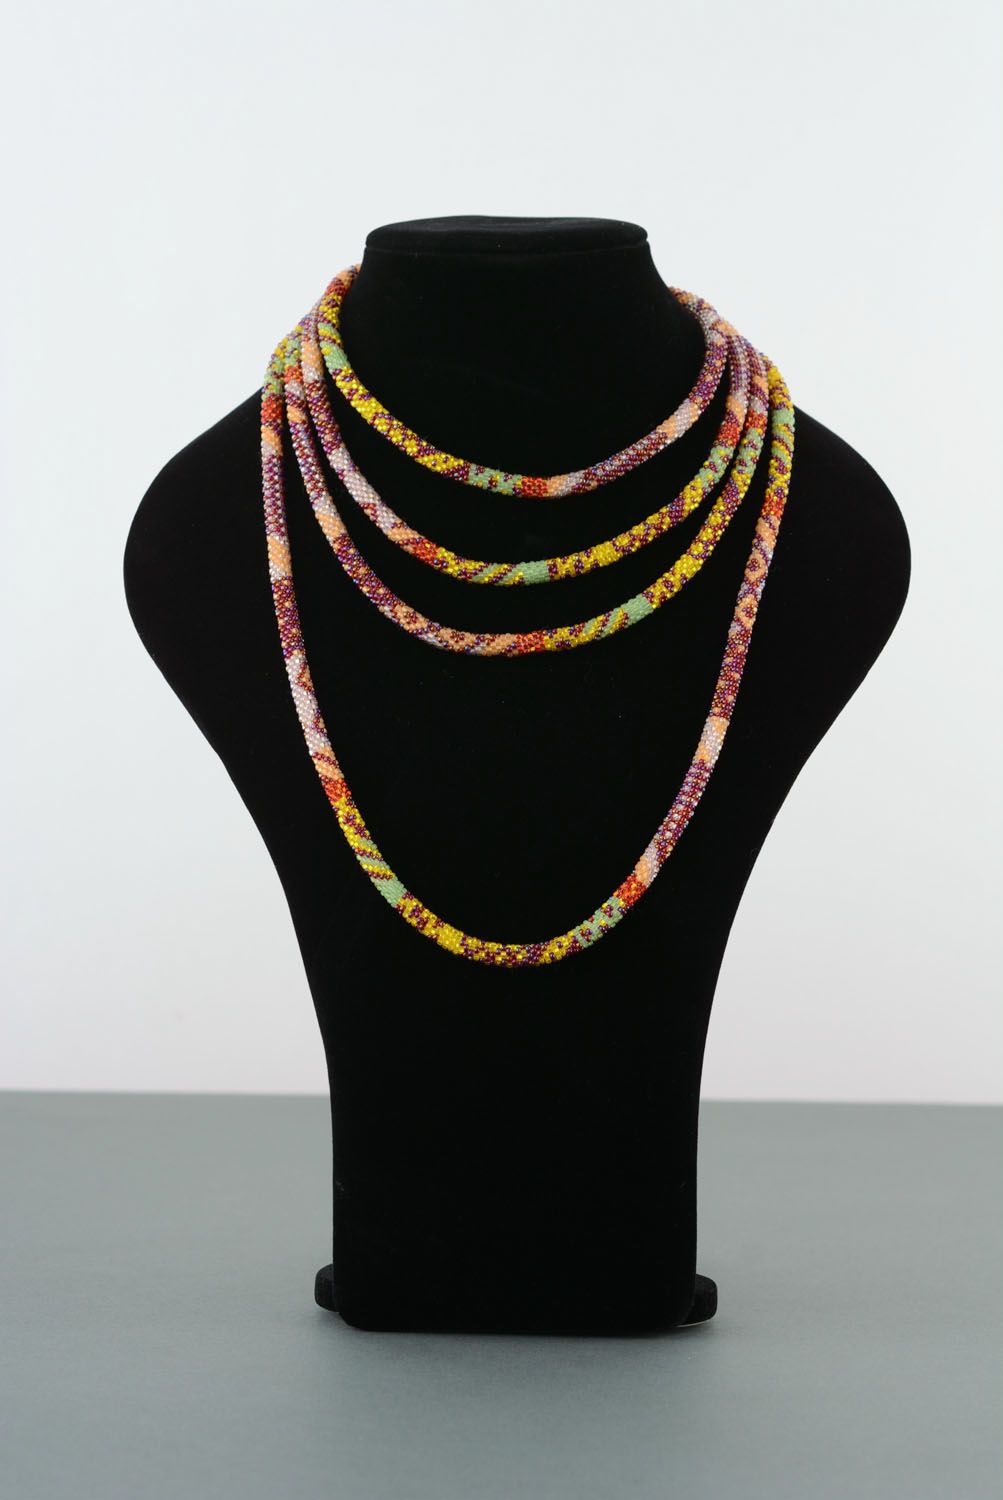 Homemade beaded cord necklace Leaving Summer photo 2